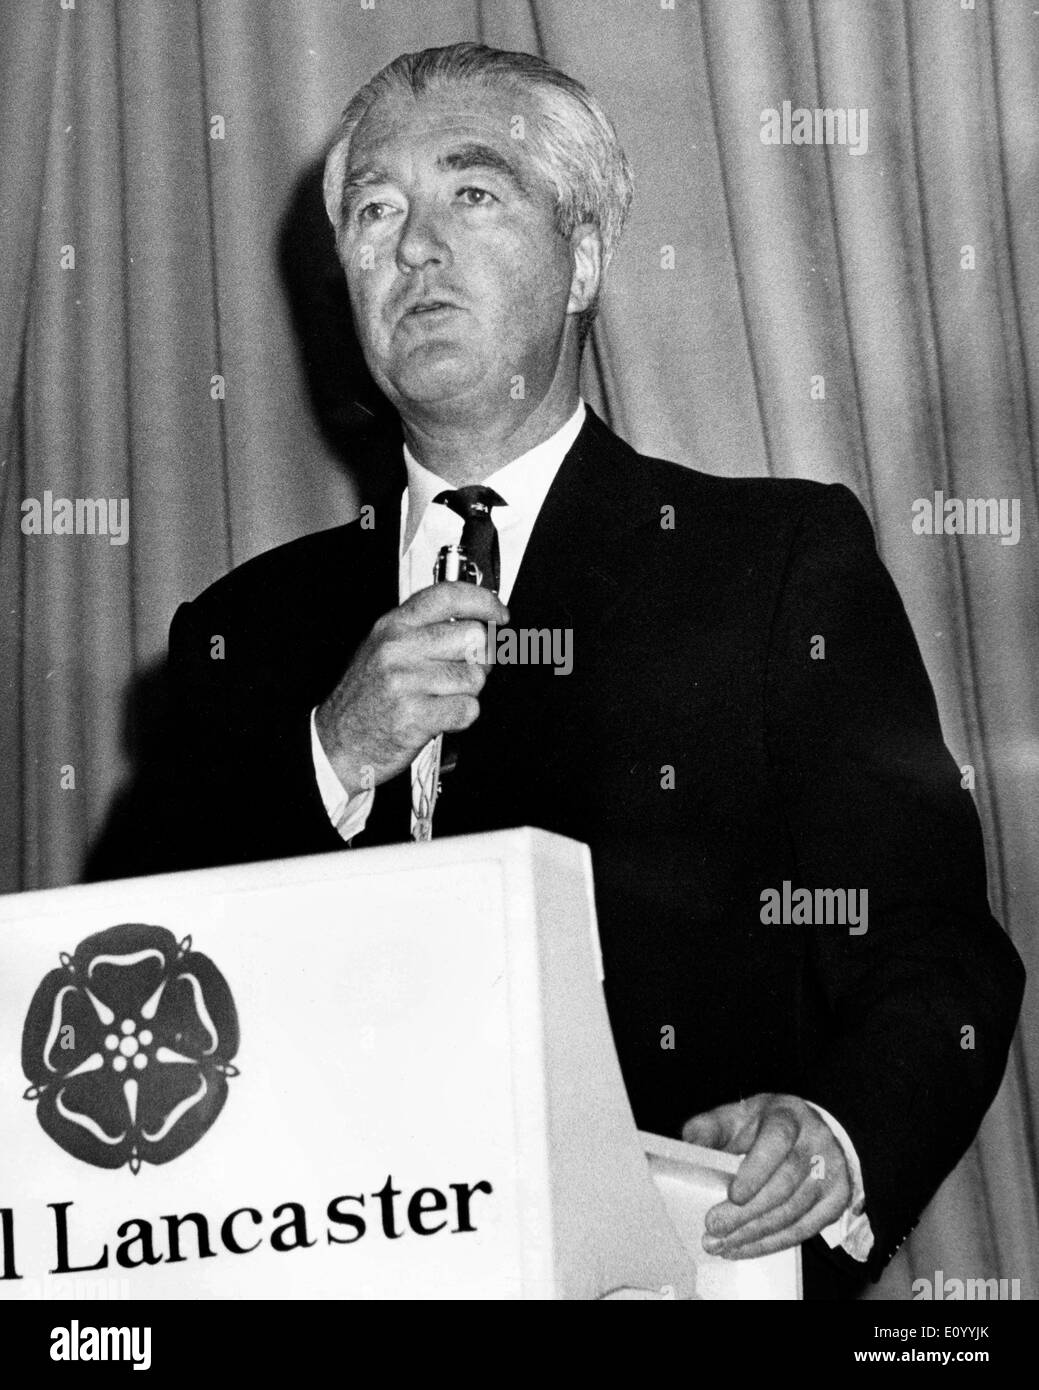 Nov 29, 1971; London, UK; Minister of State at Britain's Department of Health and Social Security, LORD ABERDARE, opened the General Assembly of the World Federation of Proprietary Medicine Manufacturers, at the Royal Lancaster Hotel in London. The picture shows Lord Aberdare during the opening speech for the conference. Stock Photo